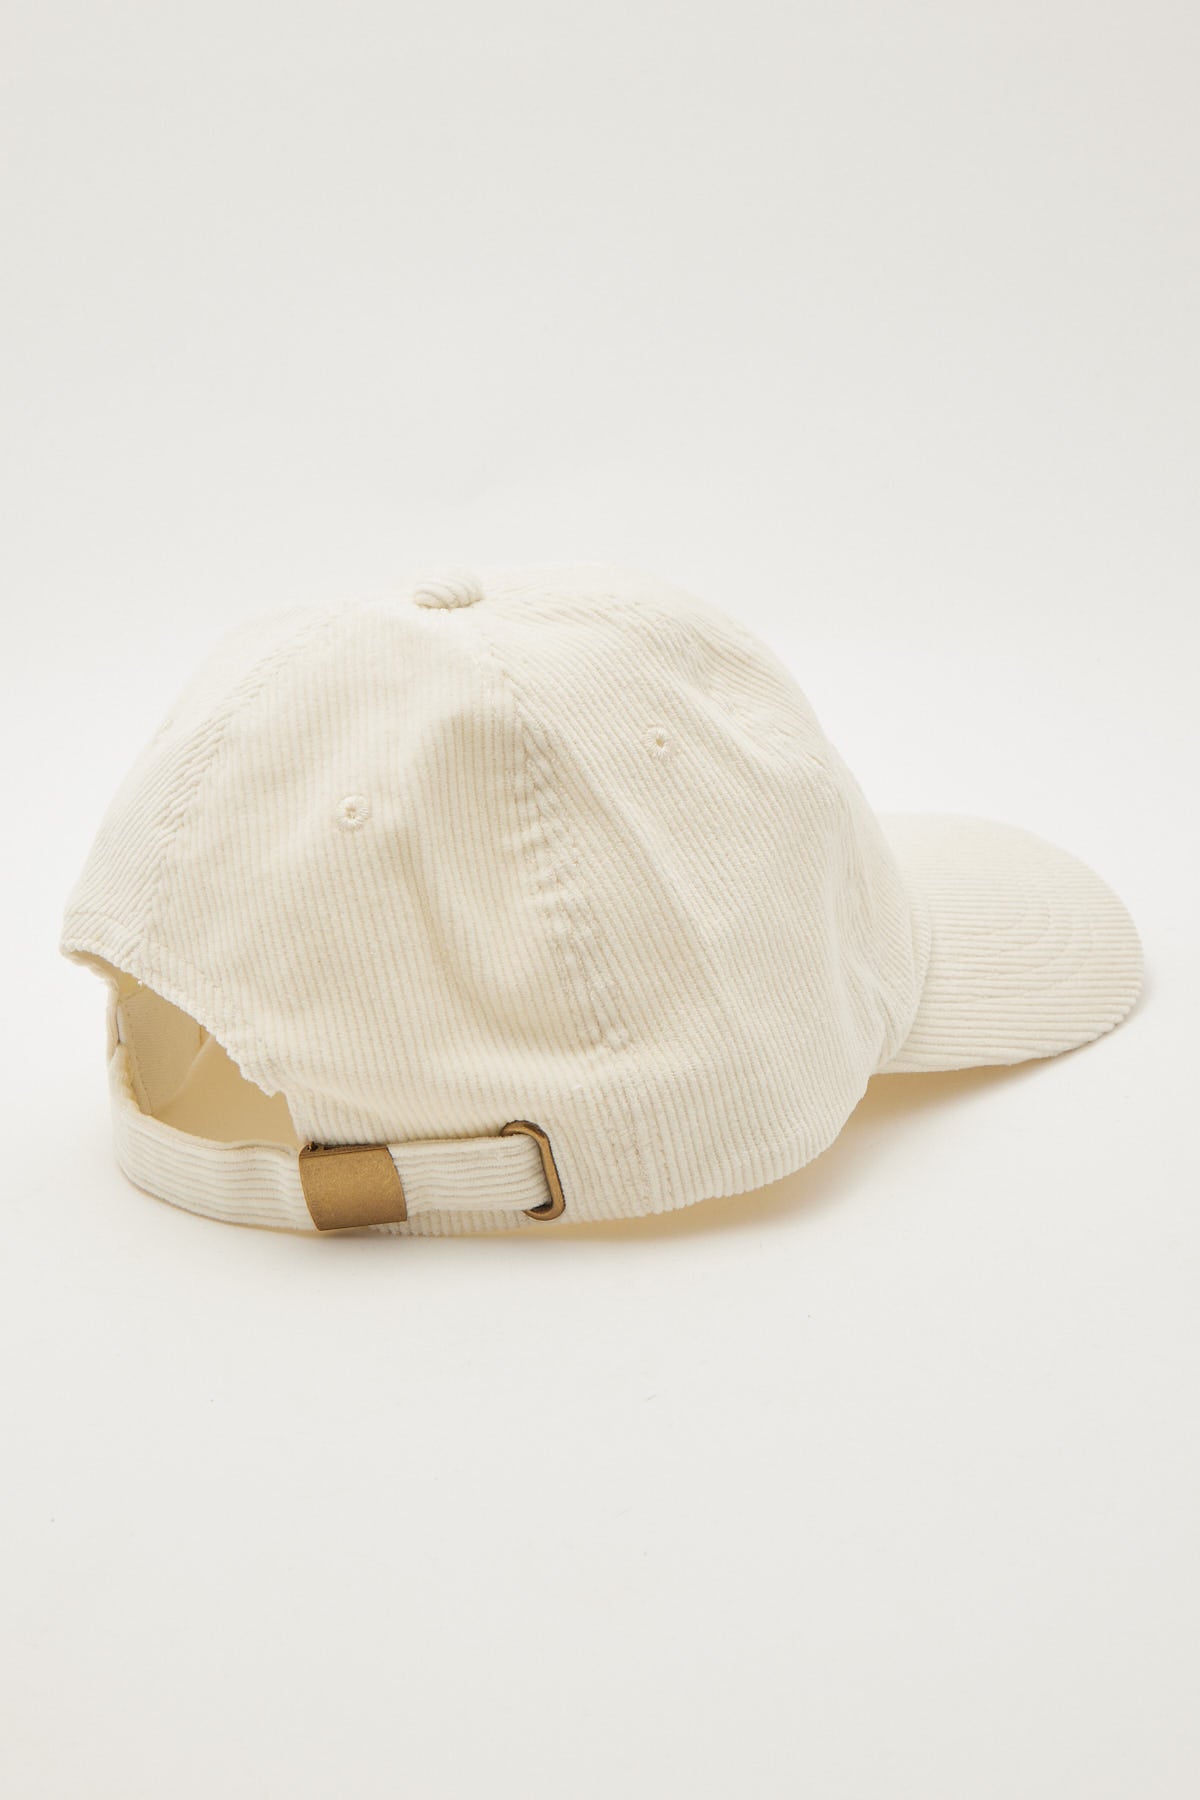 Common Need Pursuit Of Leisure Dad Cap Off White